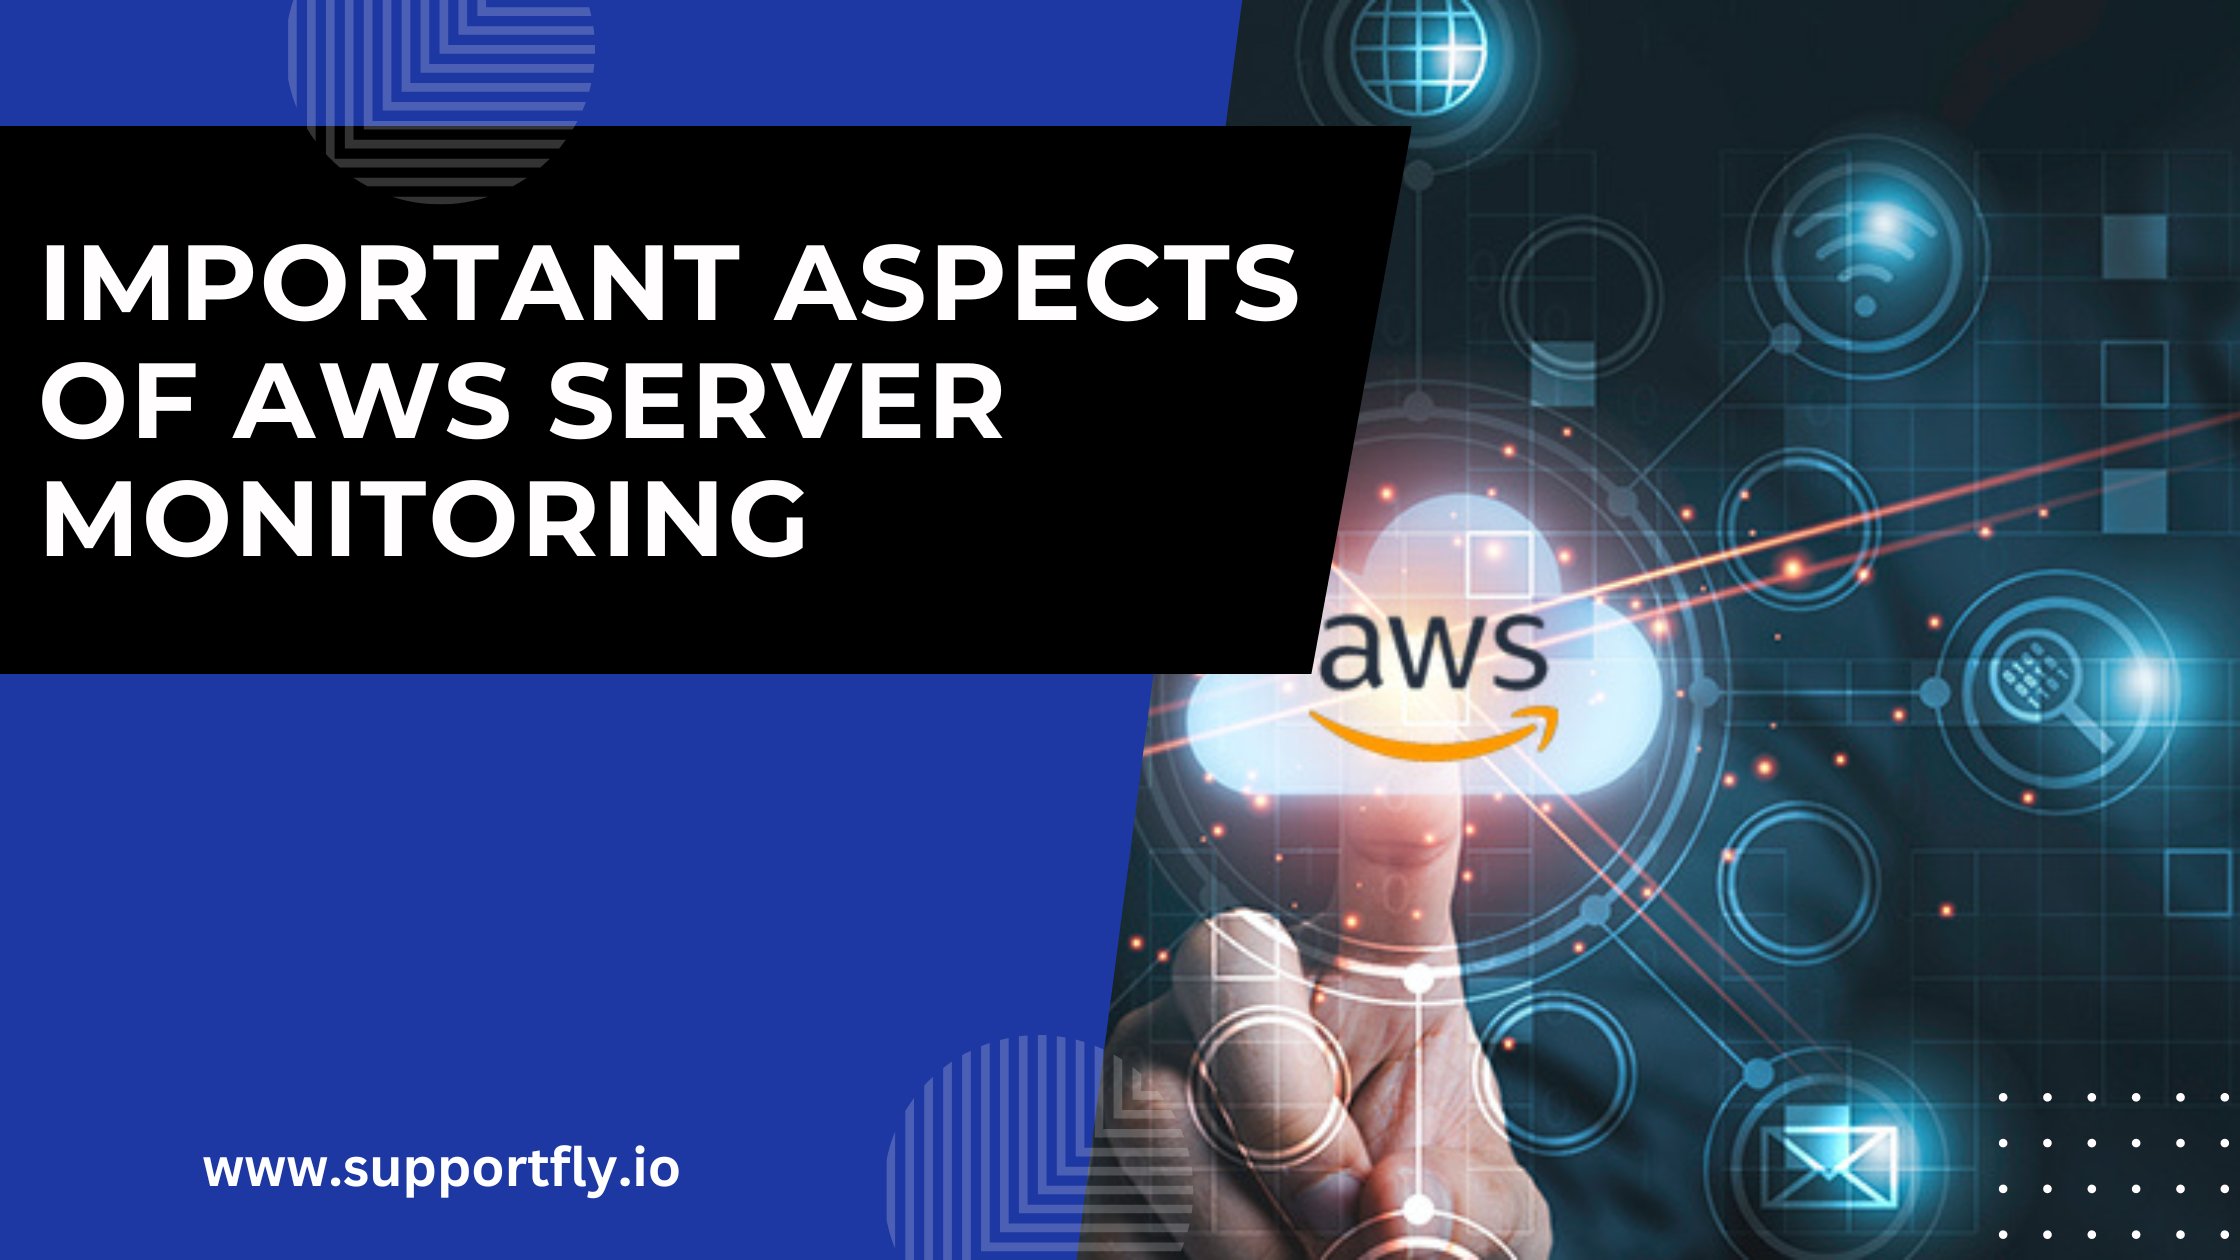 Important aspects of AWS server monitoring